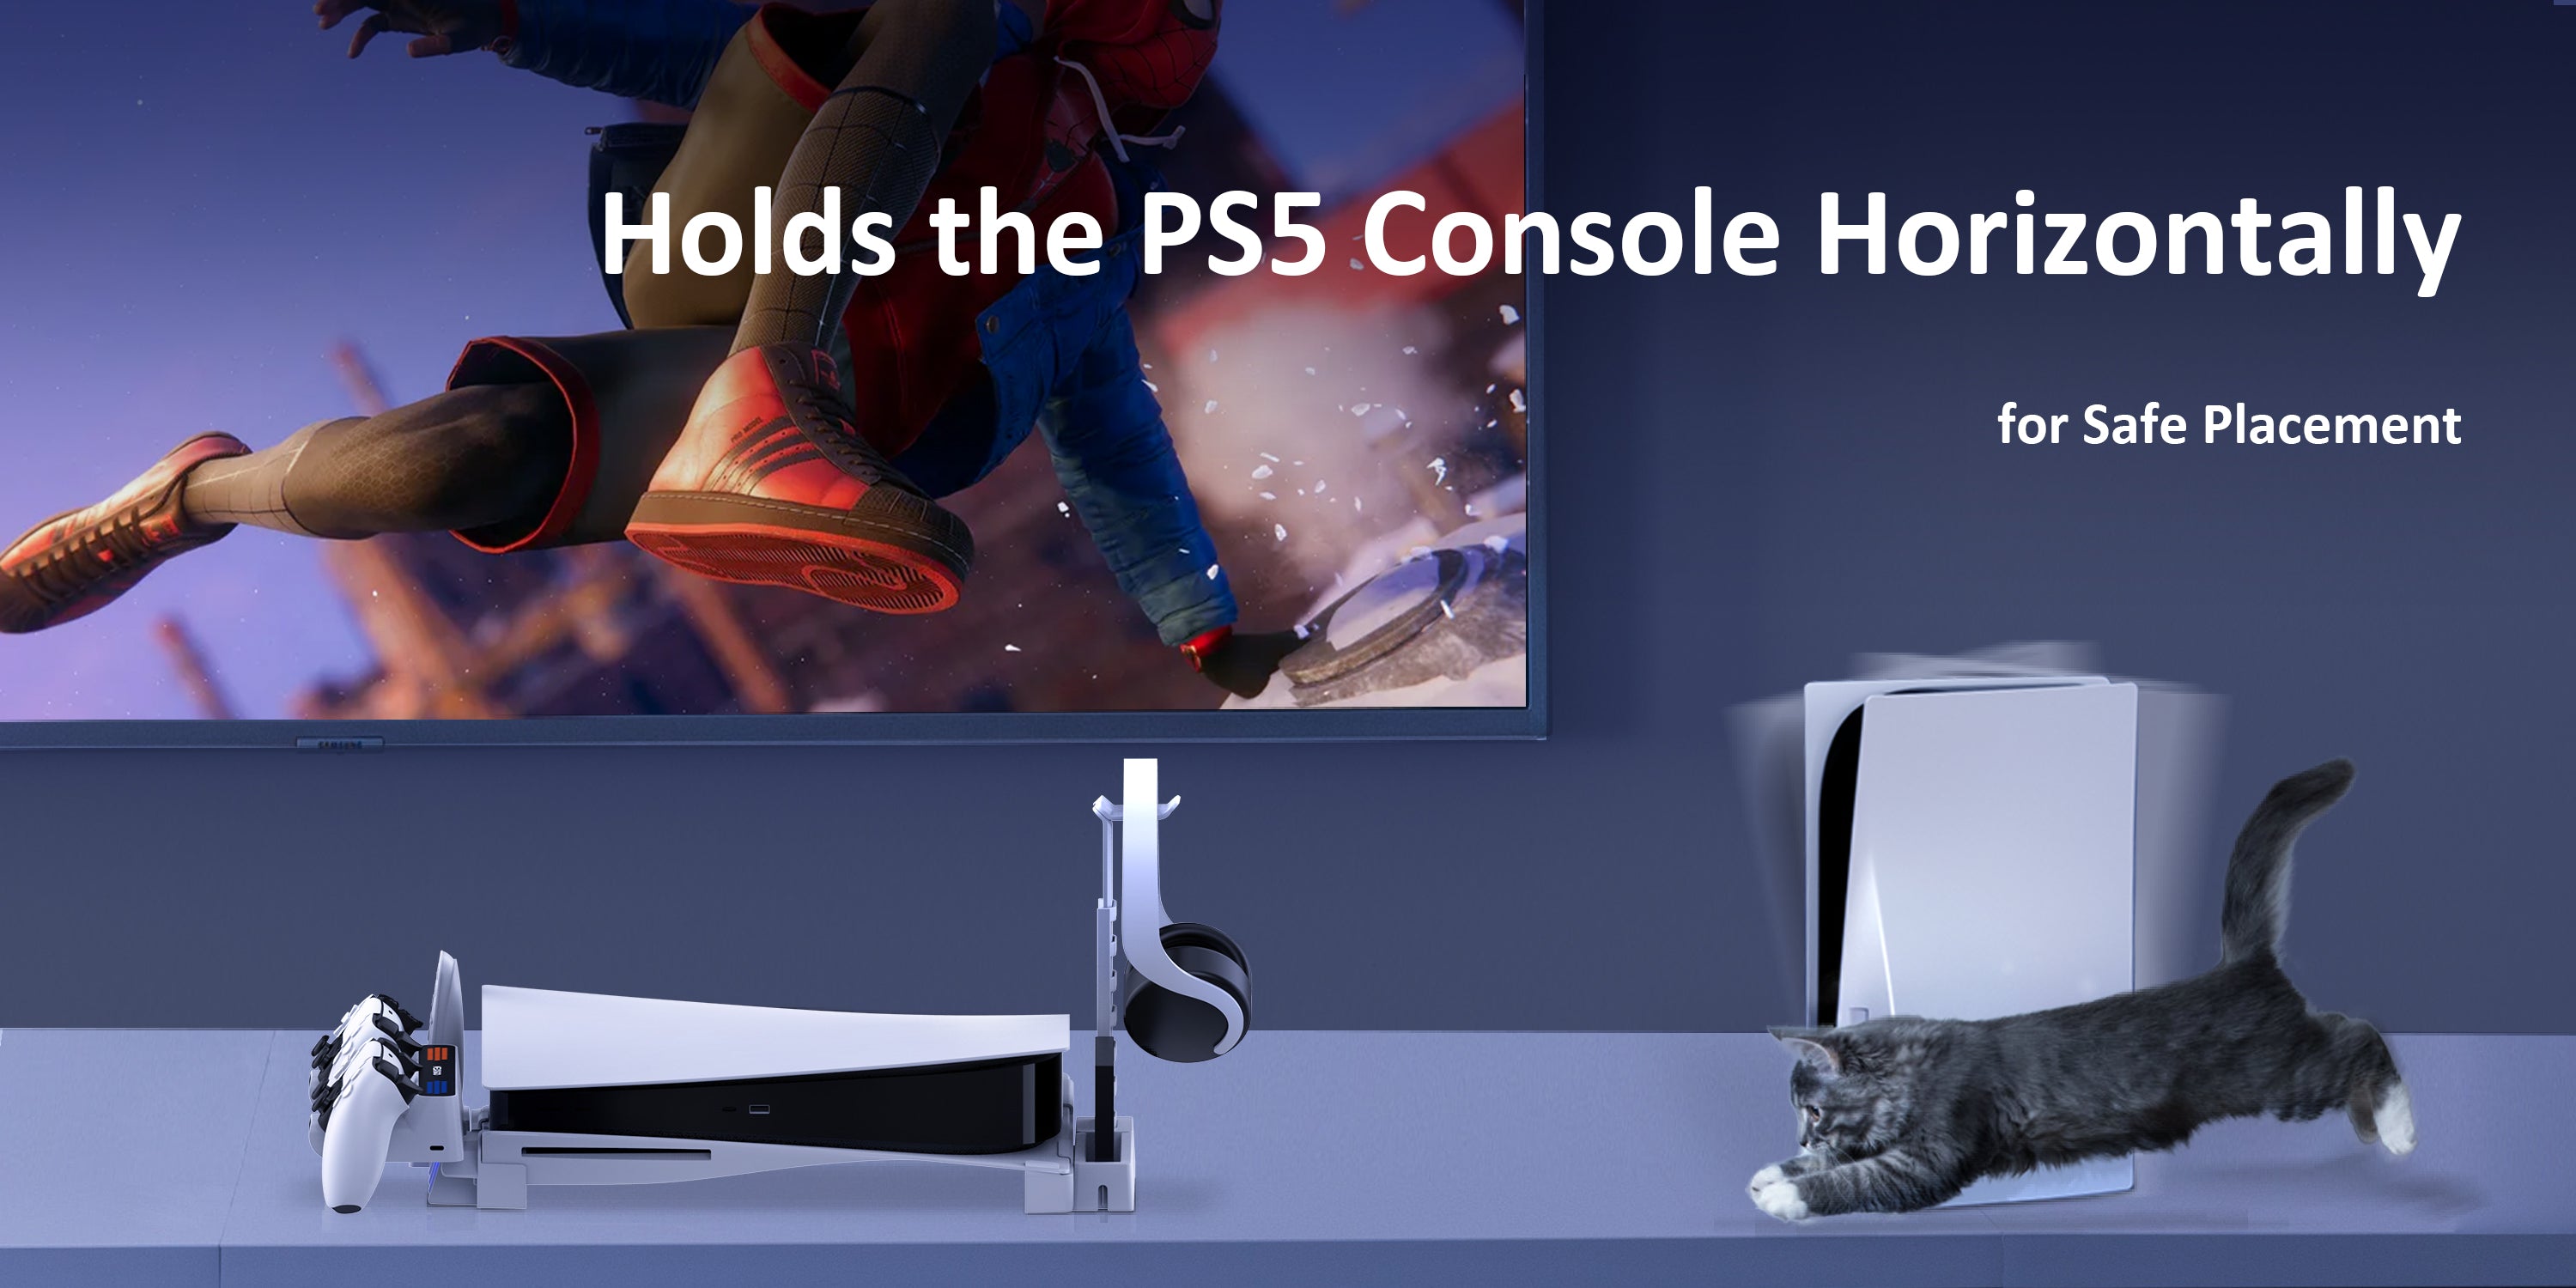 The cat running on the TV cabinet with the PS5 console placed upright can bump into the standing console